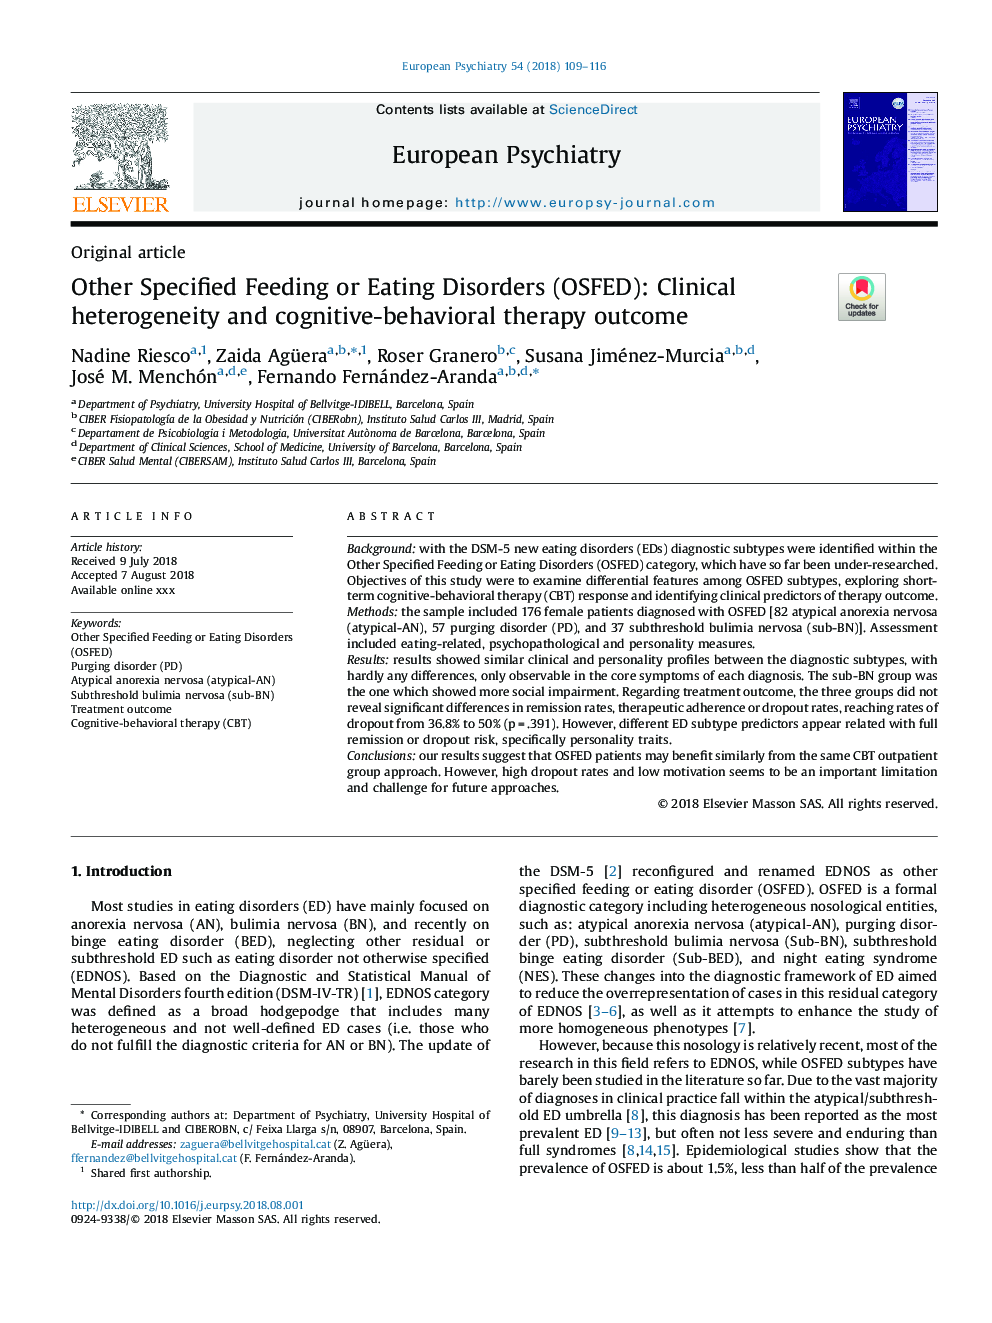 Other Specified Feeding or Eating Disorders (OSFED): Clinical heterogeneity and cognitive-behavioral therapy outcome